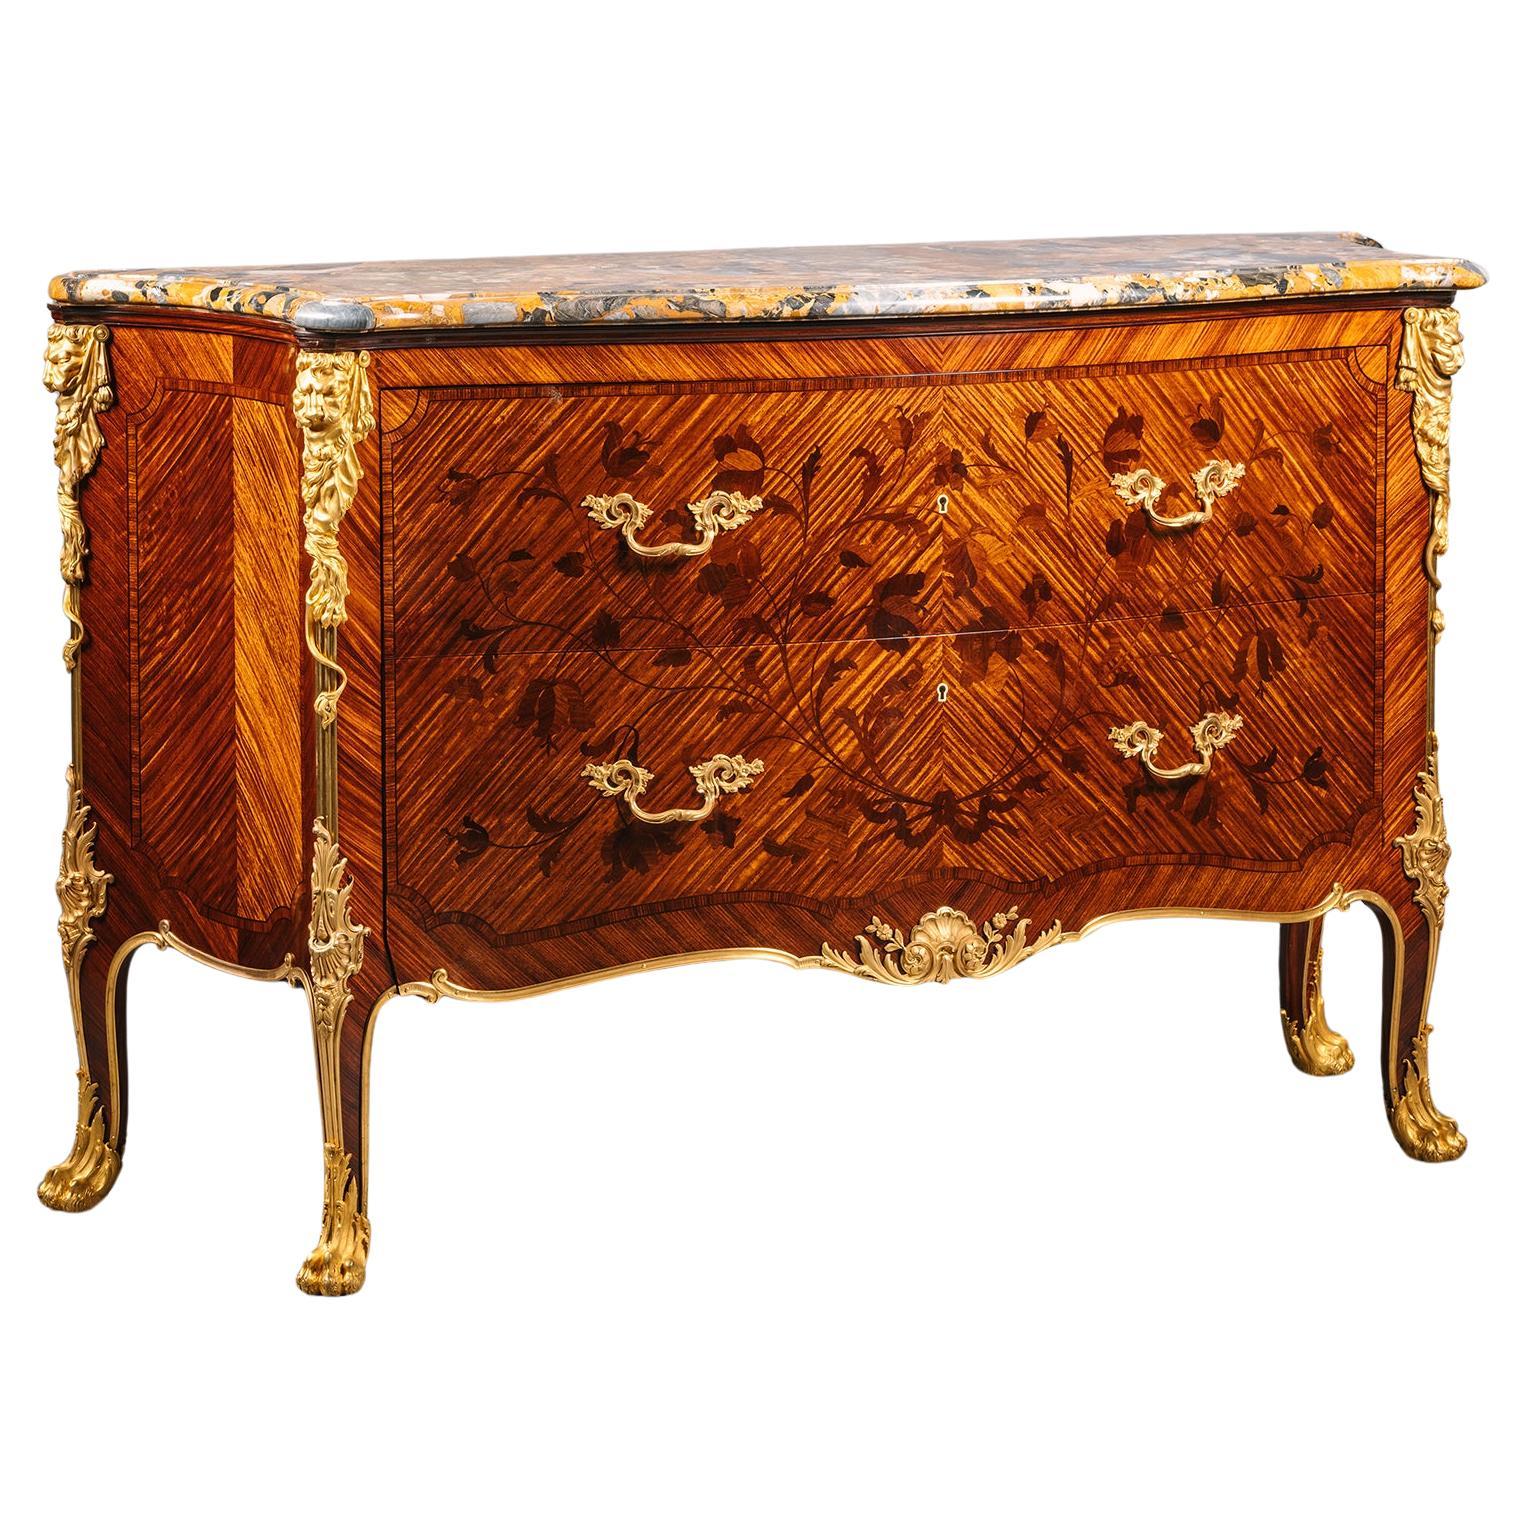 A Gilt-Bronze Mounted Marquetry Commode, By Heinrich Pallenberg, Cologne For Sale